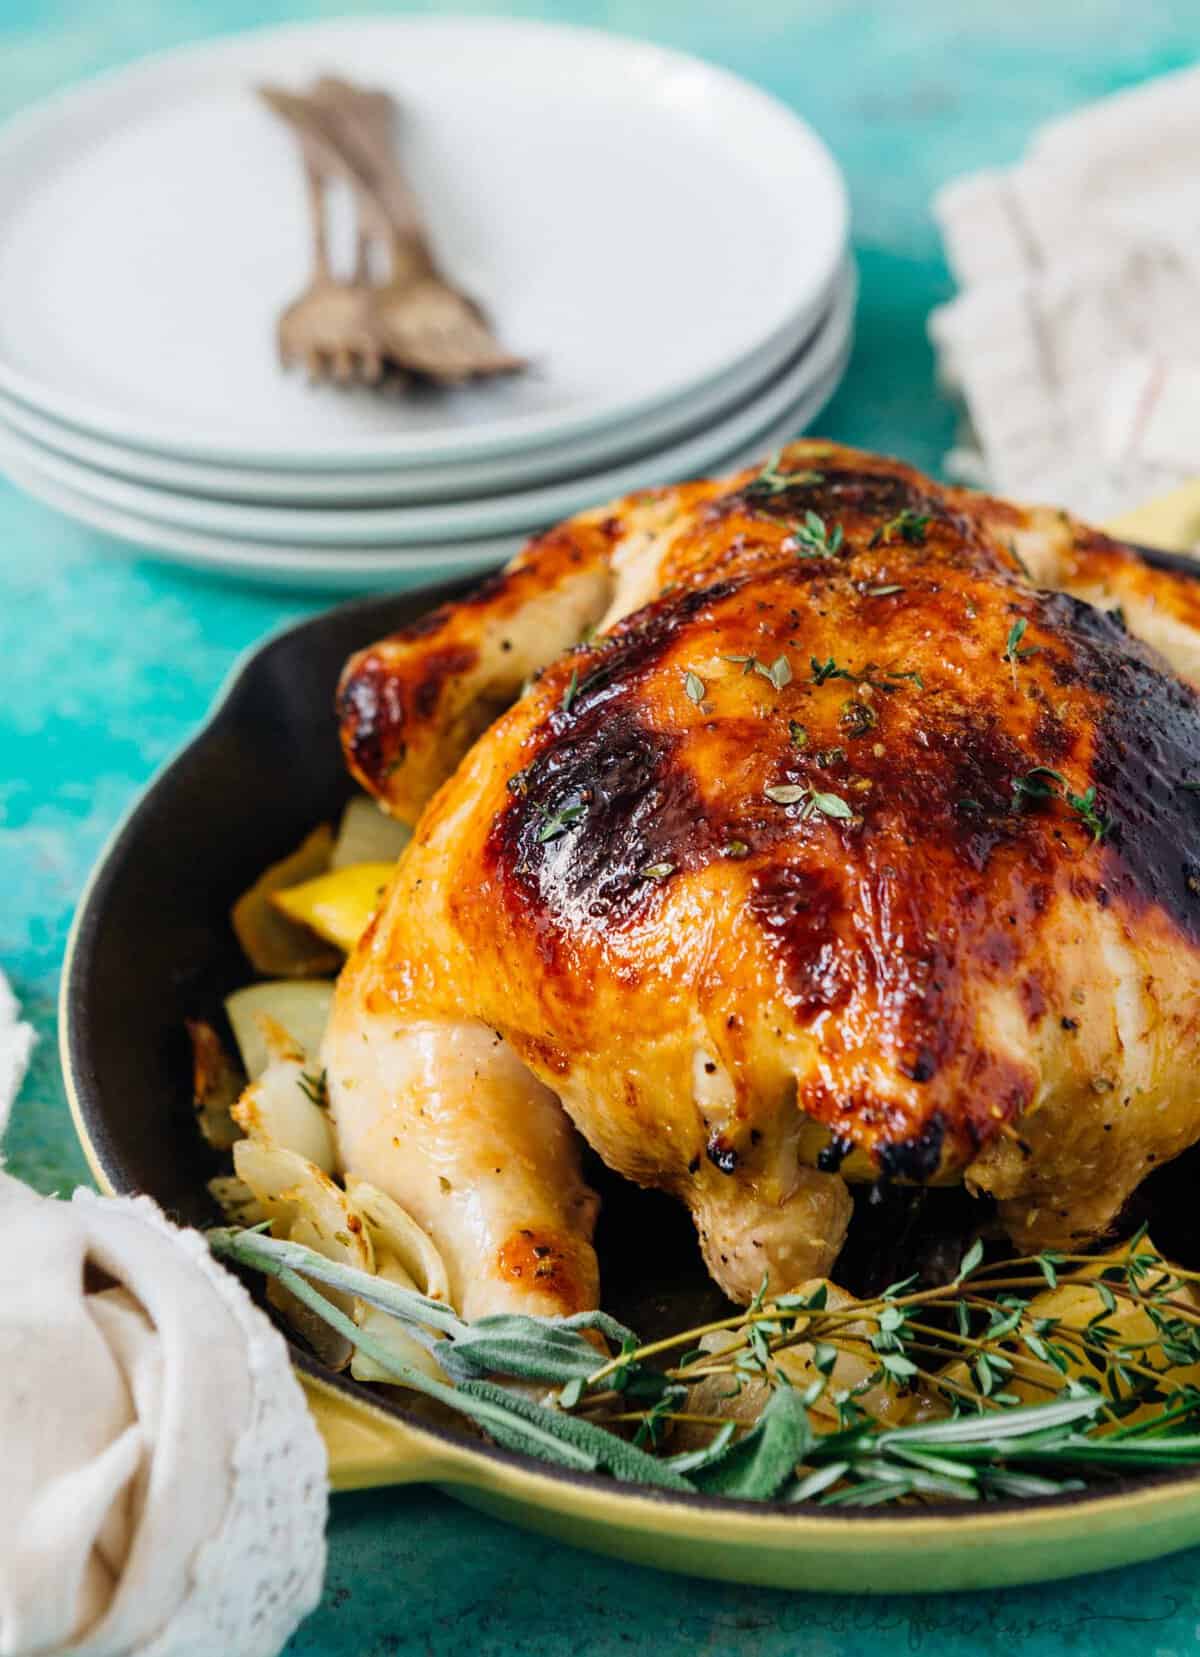 Ever thought to make a whole chicken in the pressure cooker? It comes out so tender and juicy! A great alternative to the regular bird on Thanksgiving Day and a way to free up oven space!